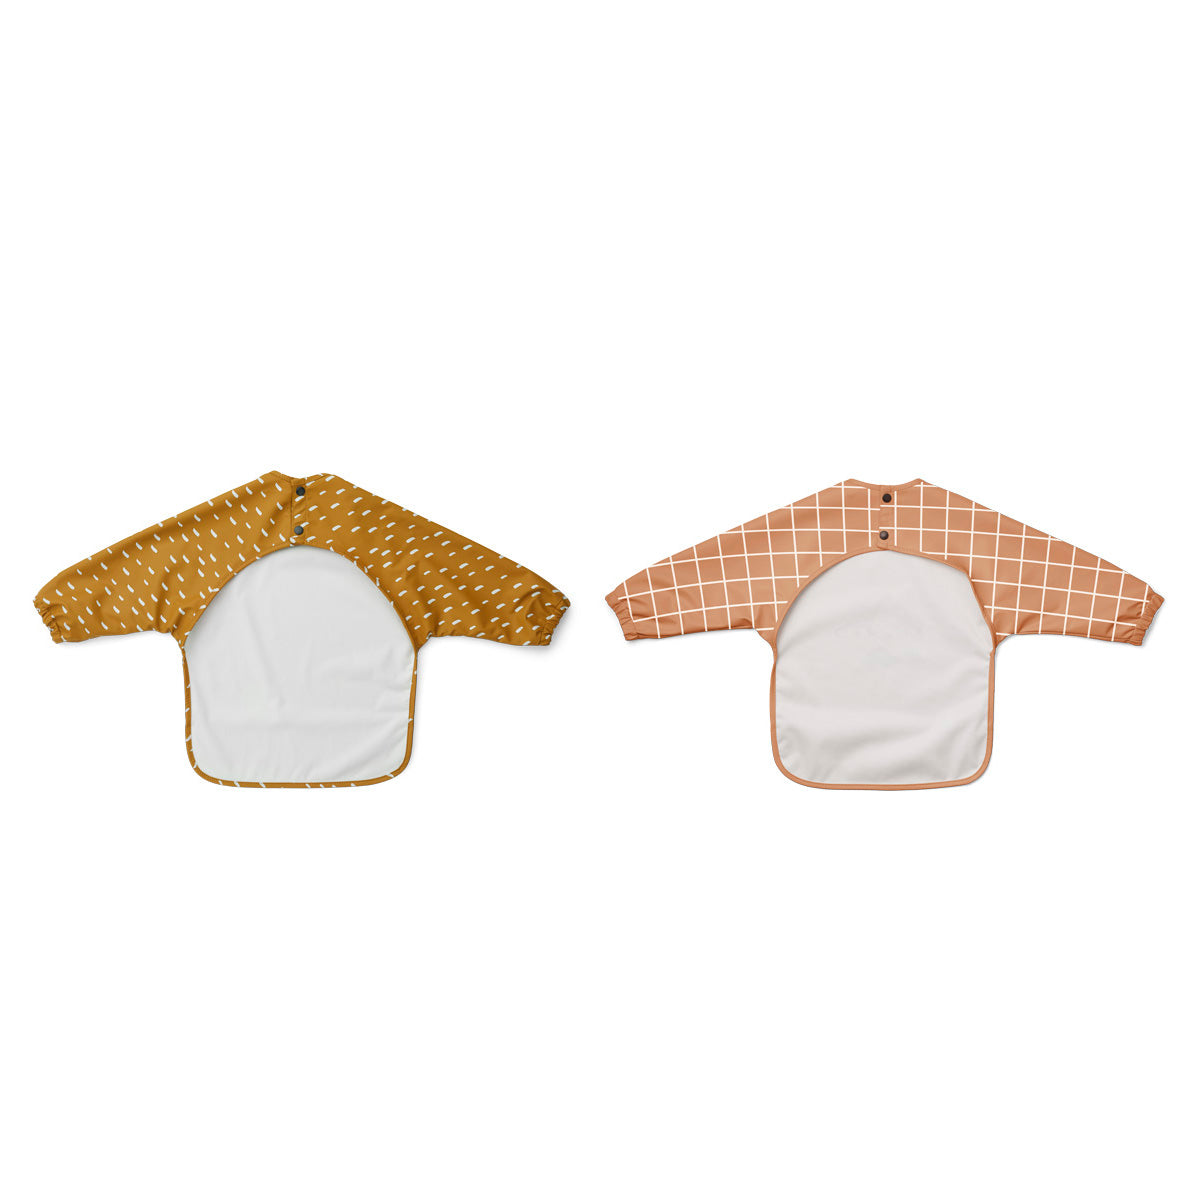 Merle cape bib - 2 Pack (Available in 2 Styles)